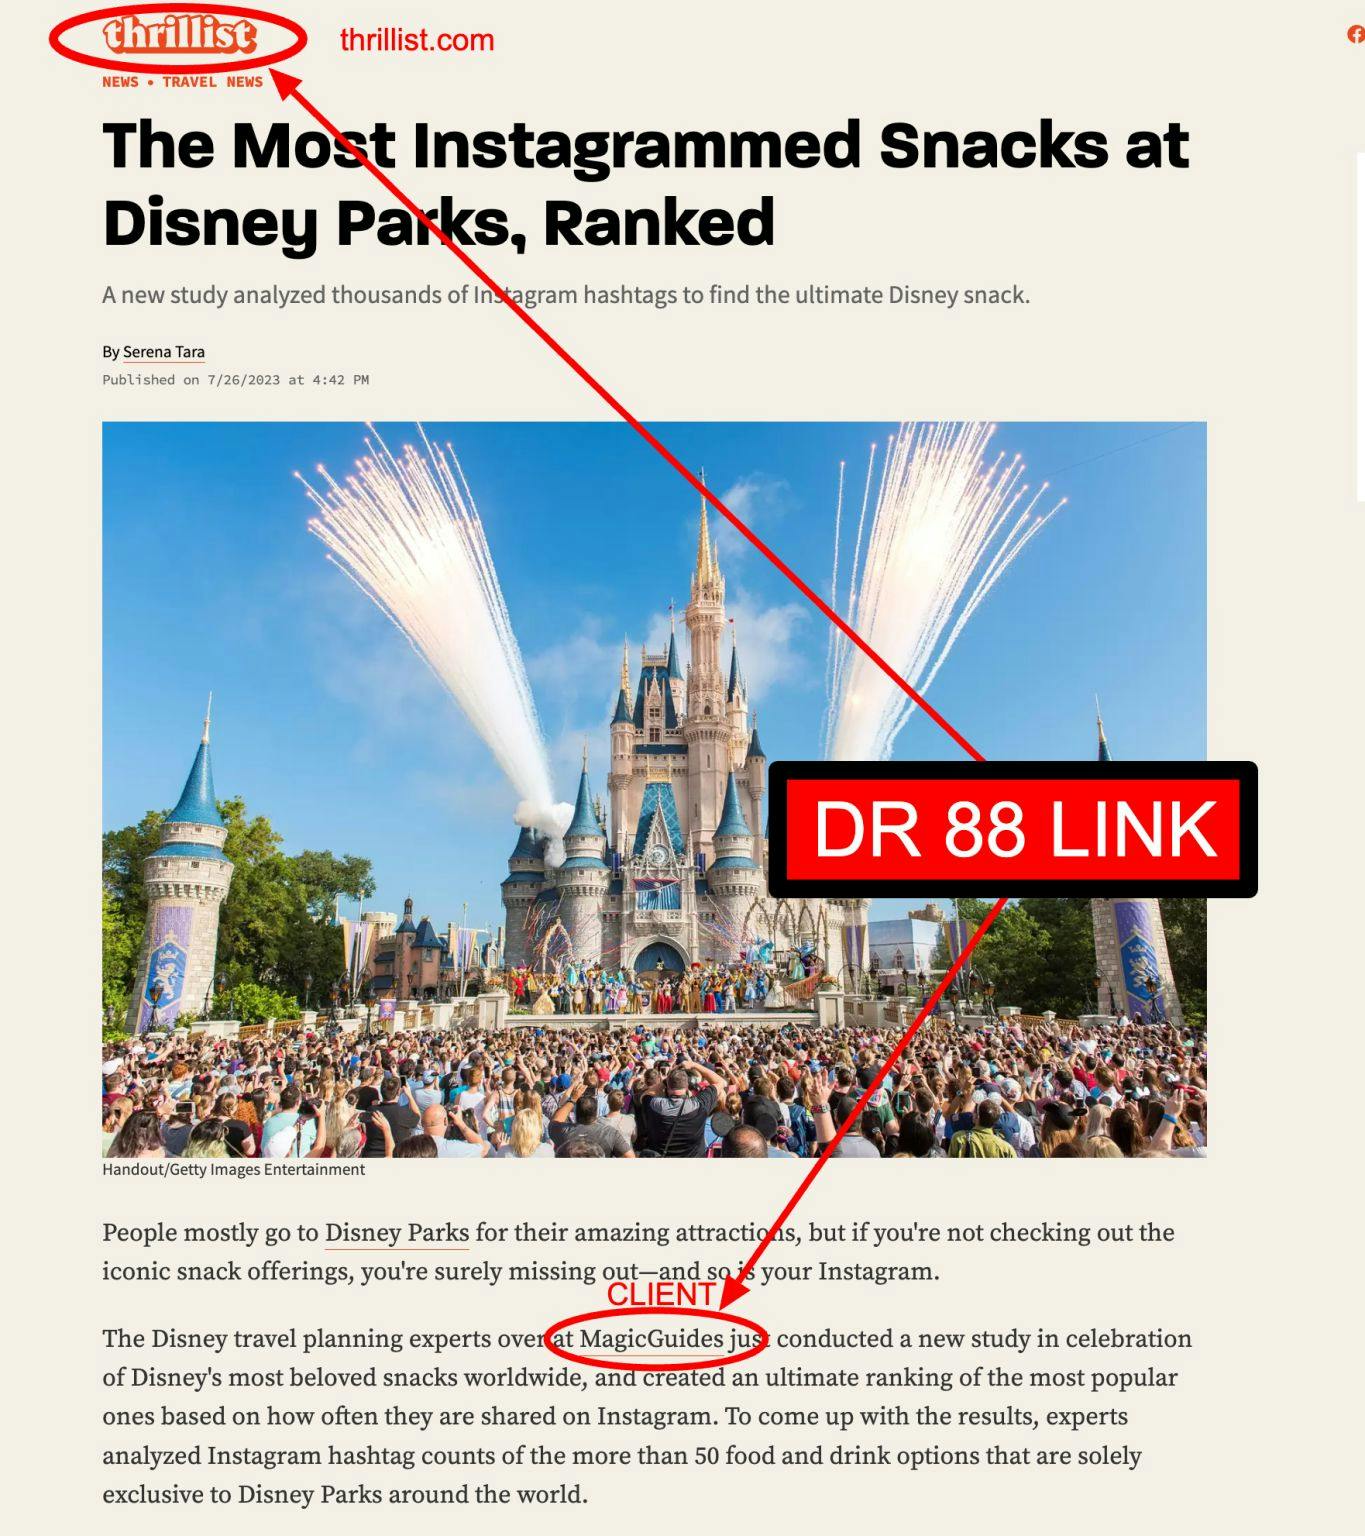 How a story of the most popular snacks at Disney World landed big links for a travel client